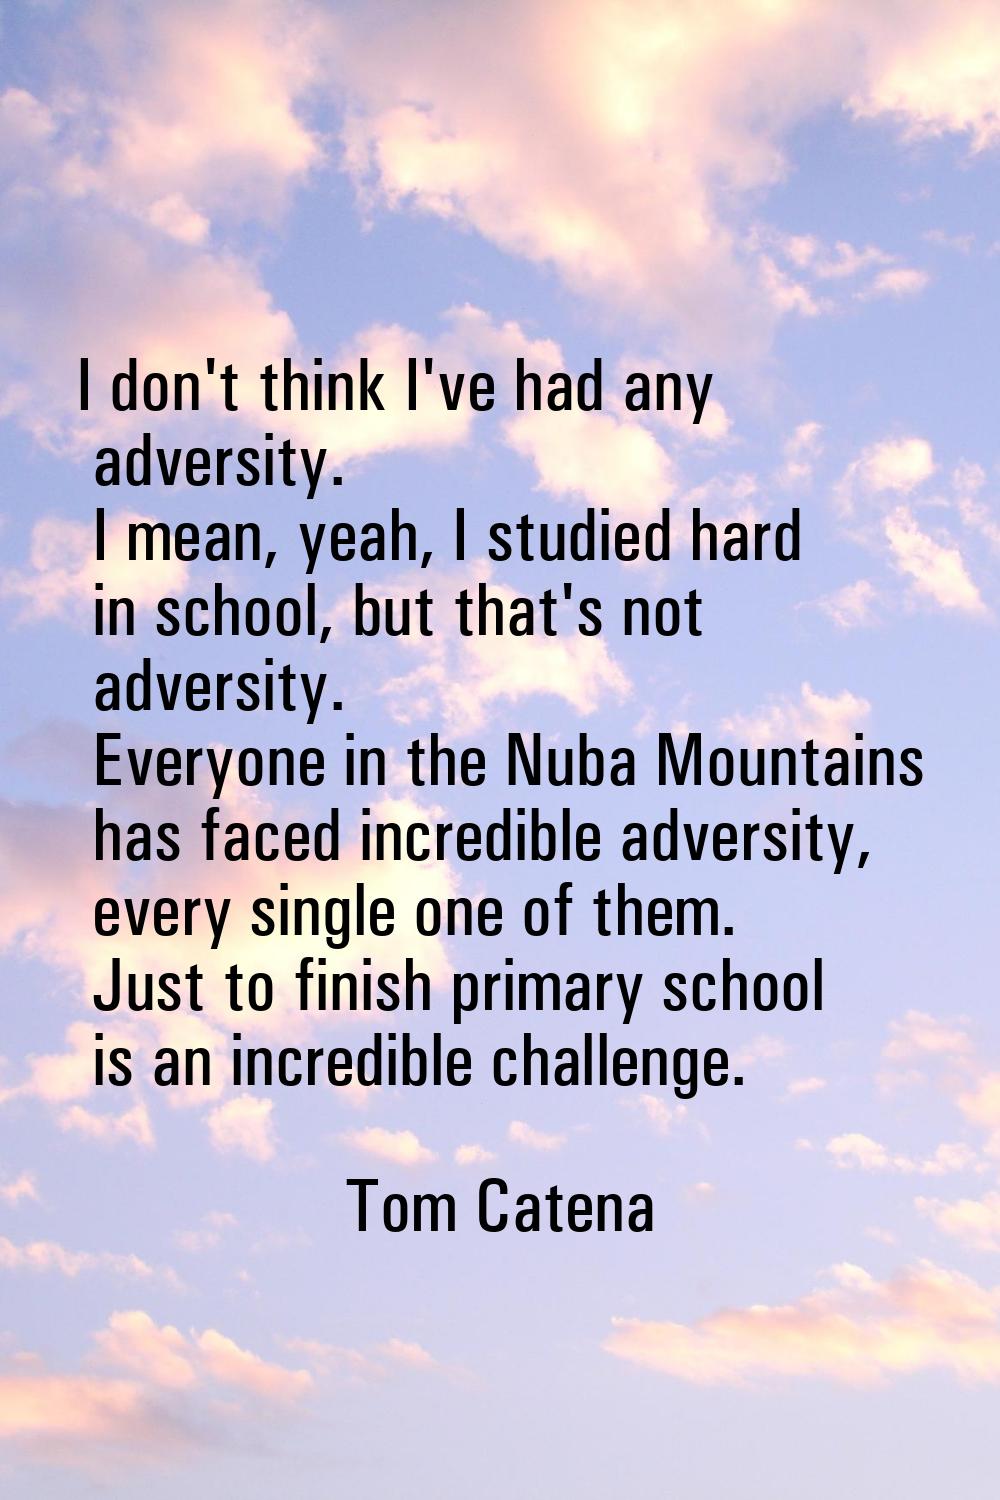 I don't think I've had any adversity. I mean, yeah, I studied hard in school, but that's not advers